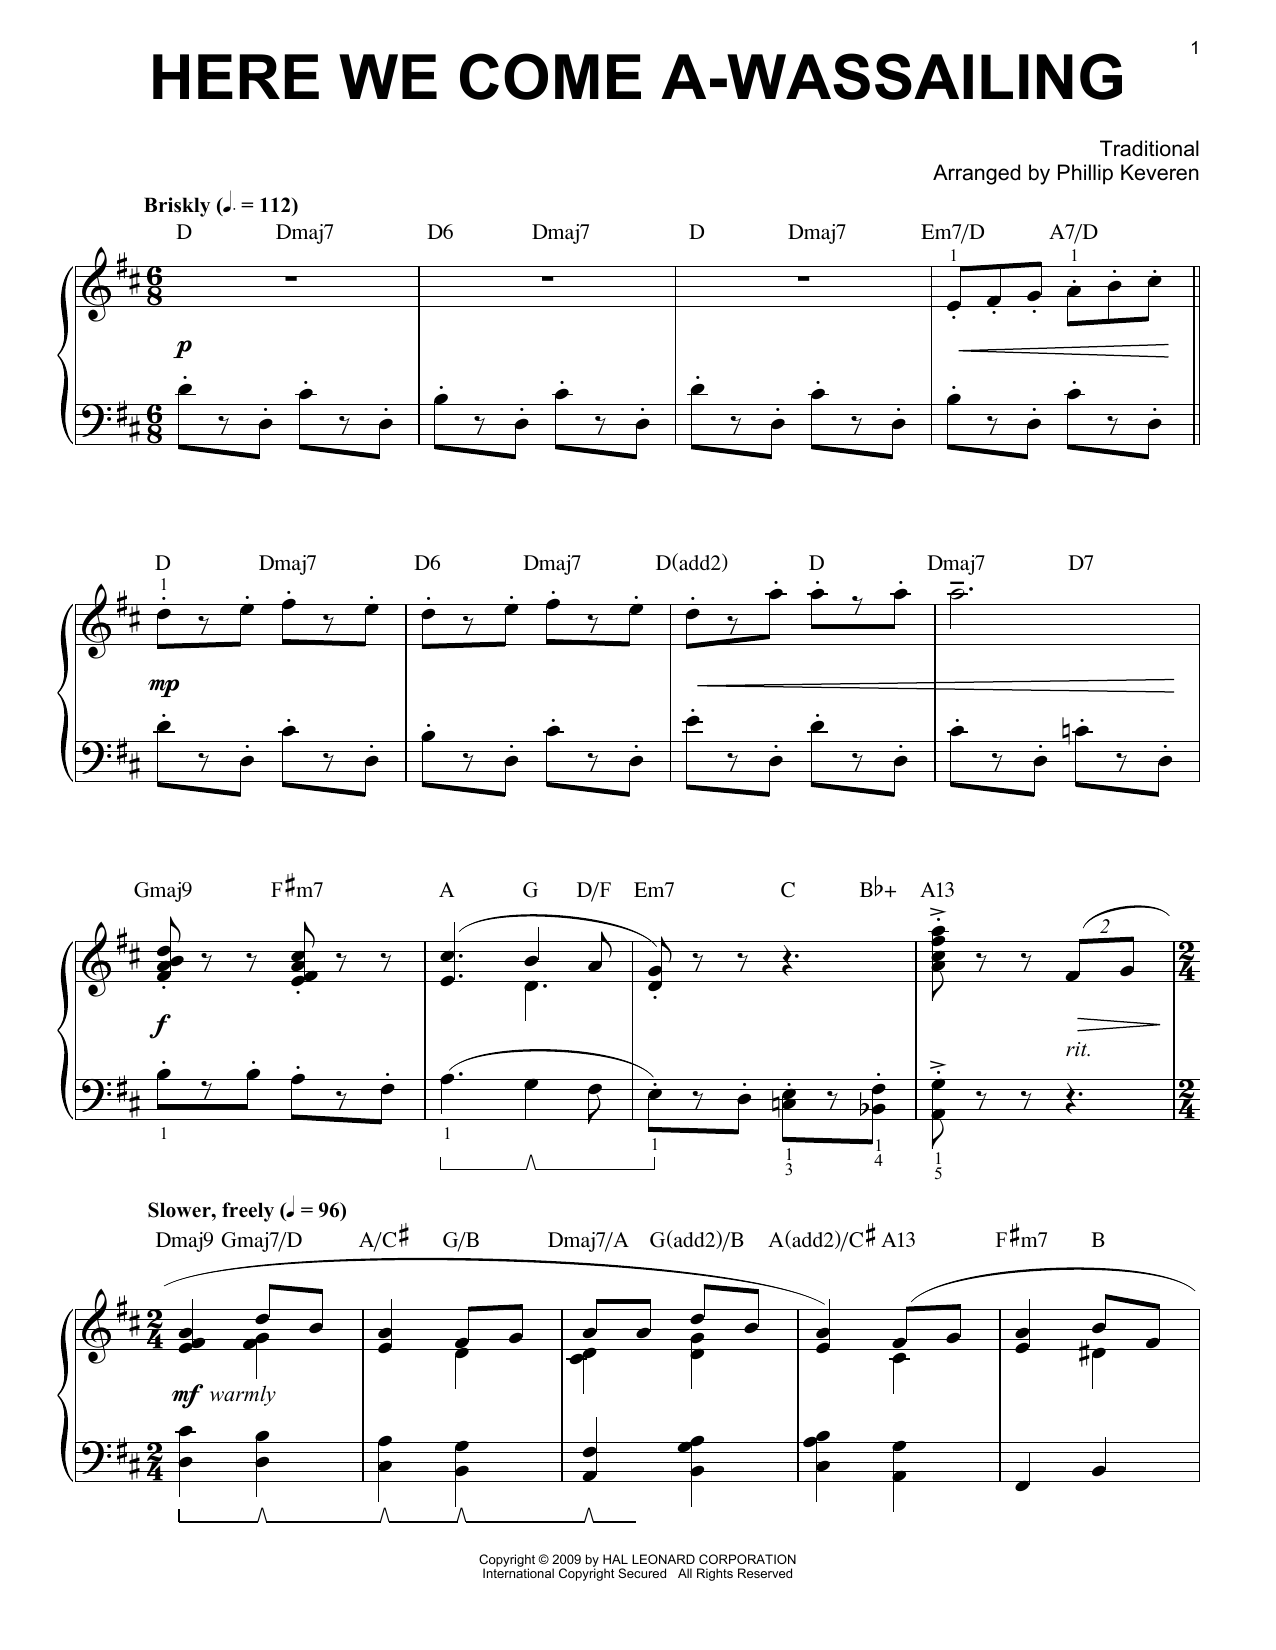 Download Traditional Here We Come A-Wassailing [Jazz version Sheet Music